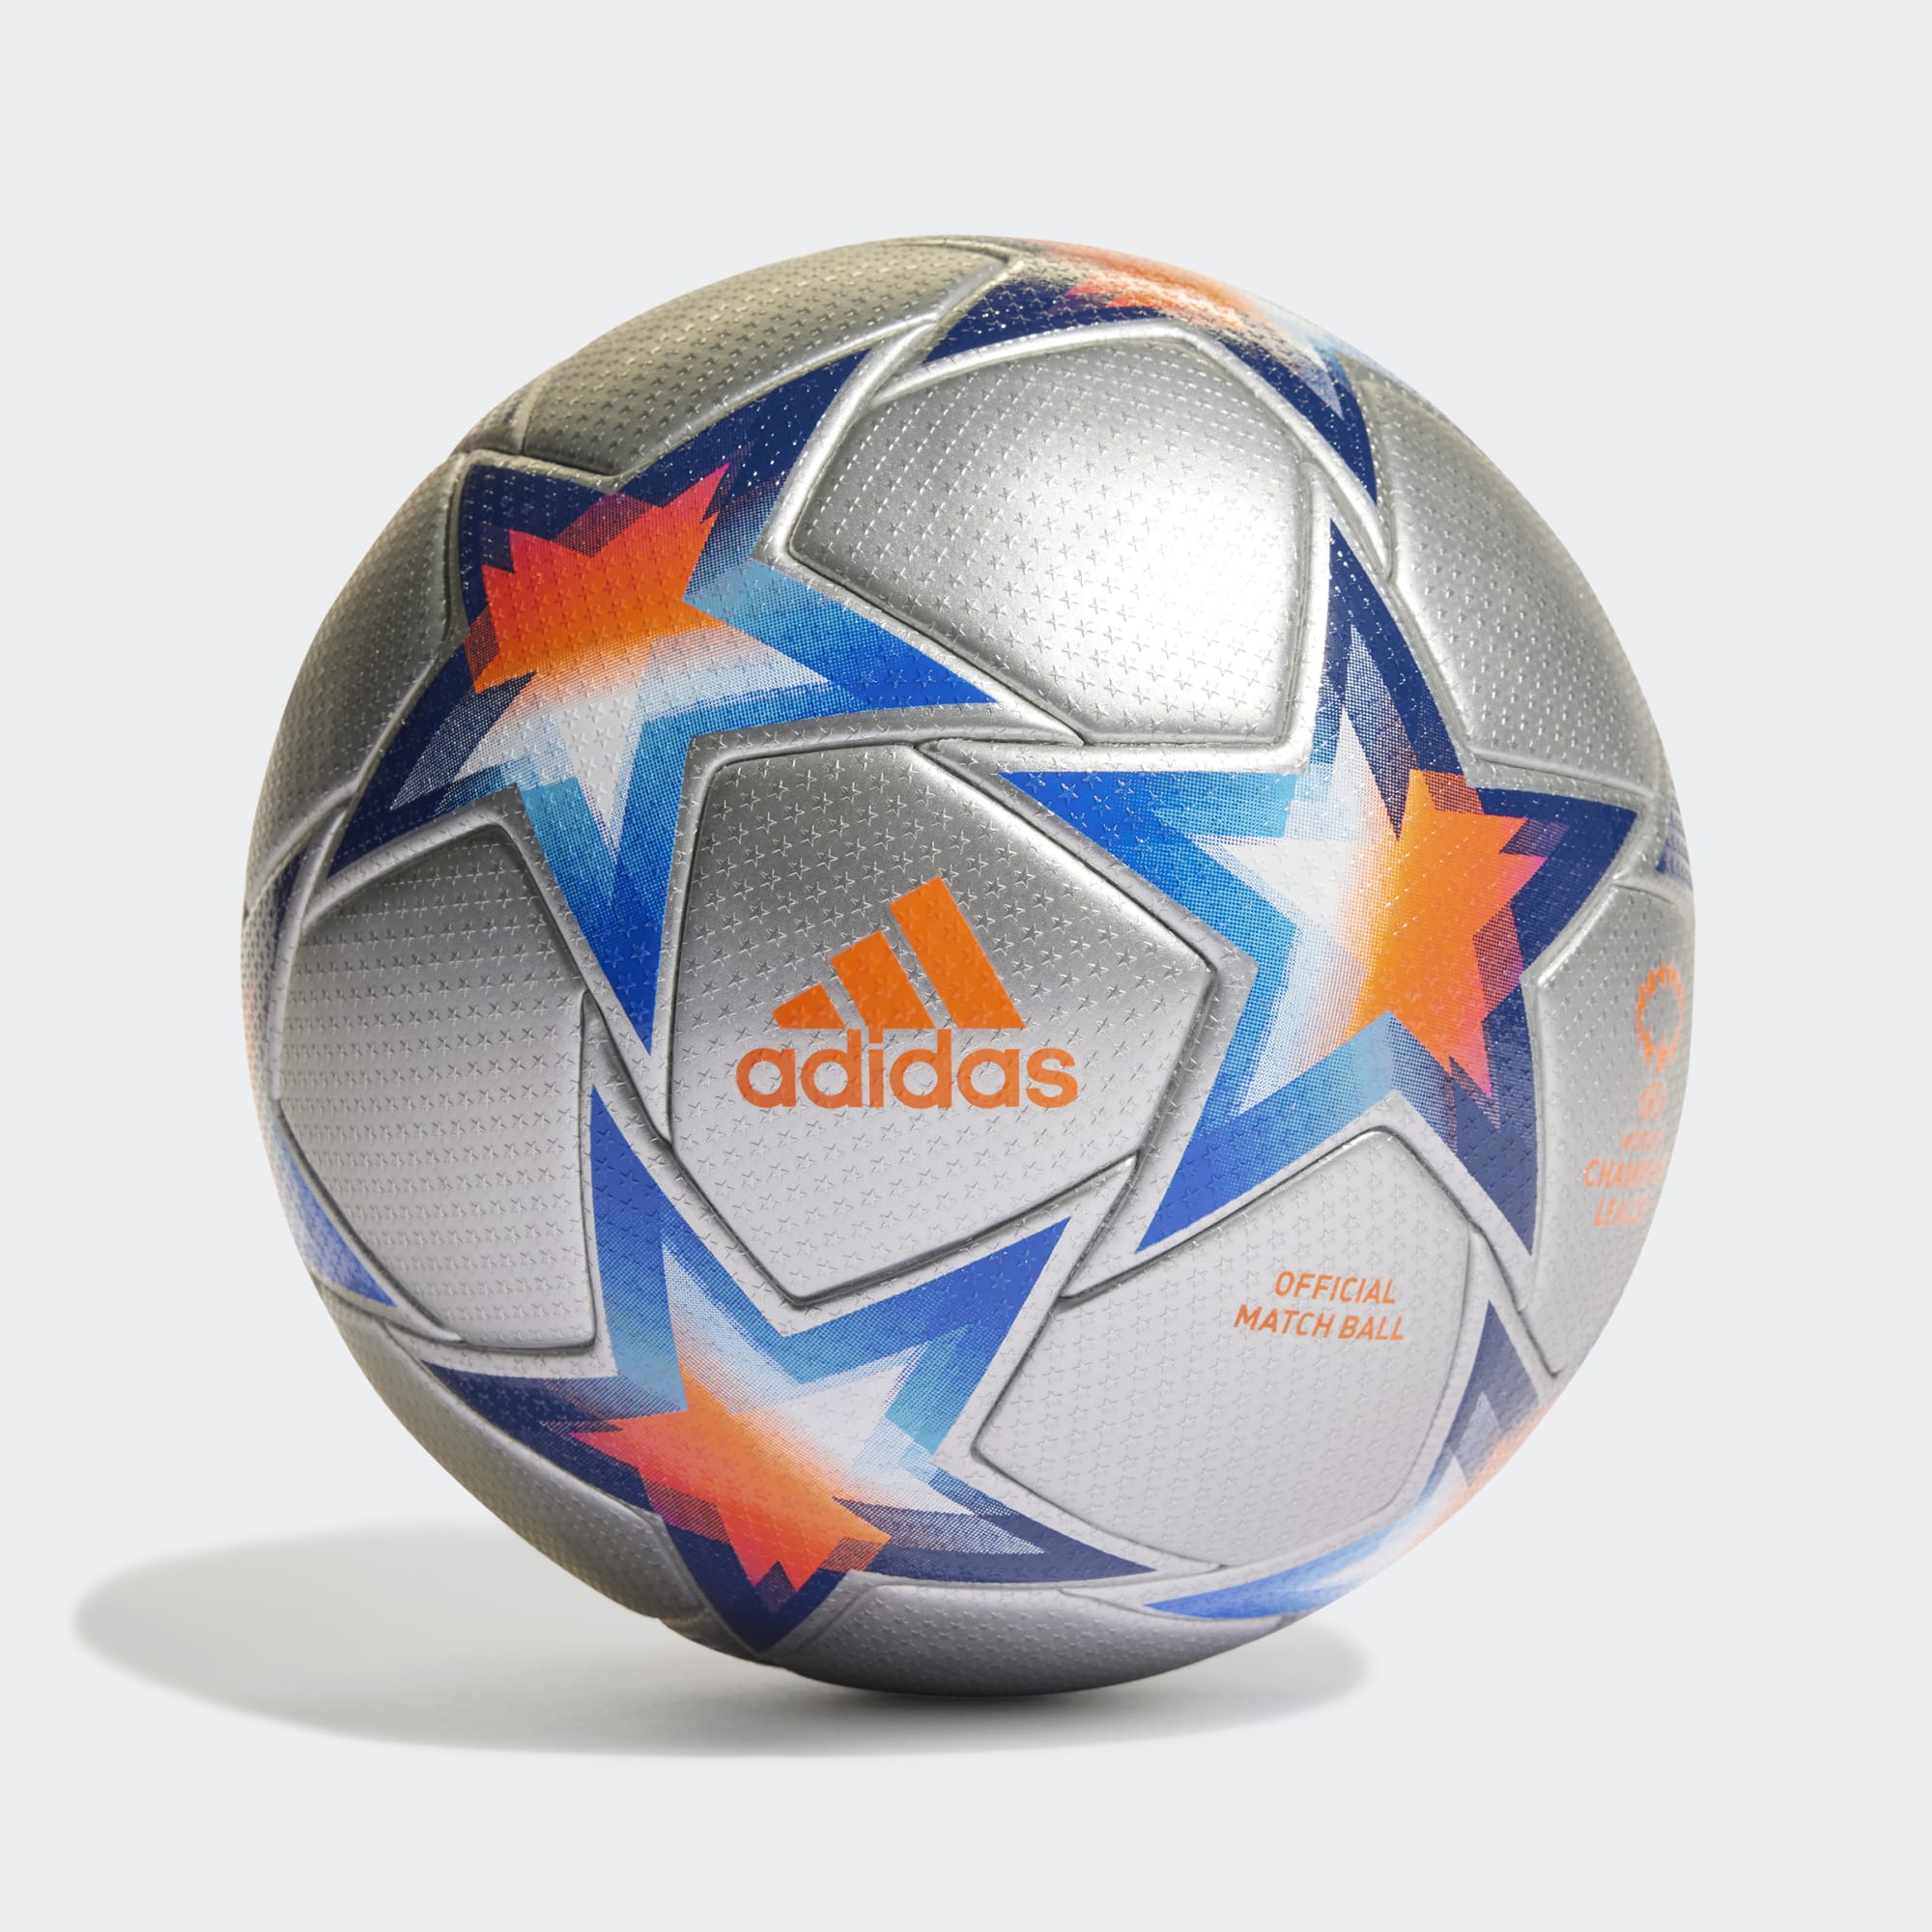 Adidas Brazuca Official Match Ball Review - Soccer Reviews For You